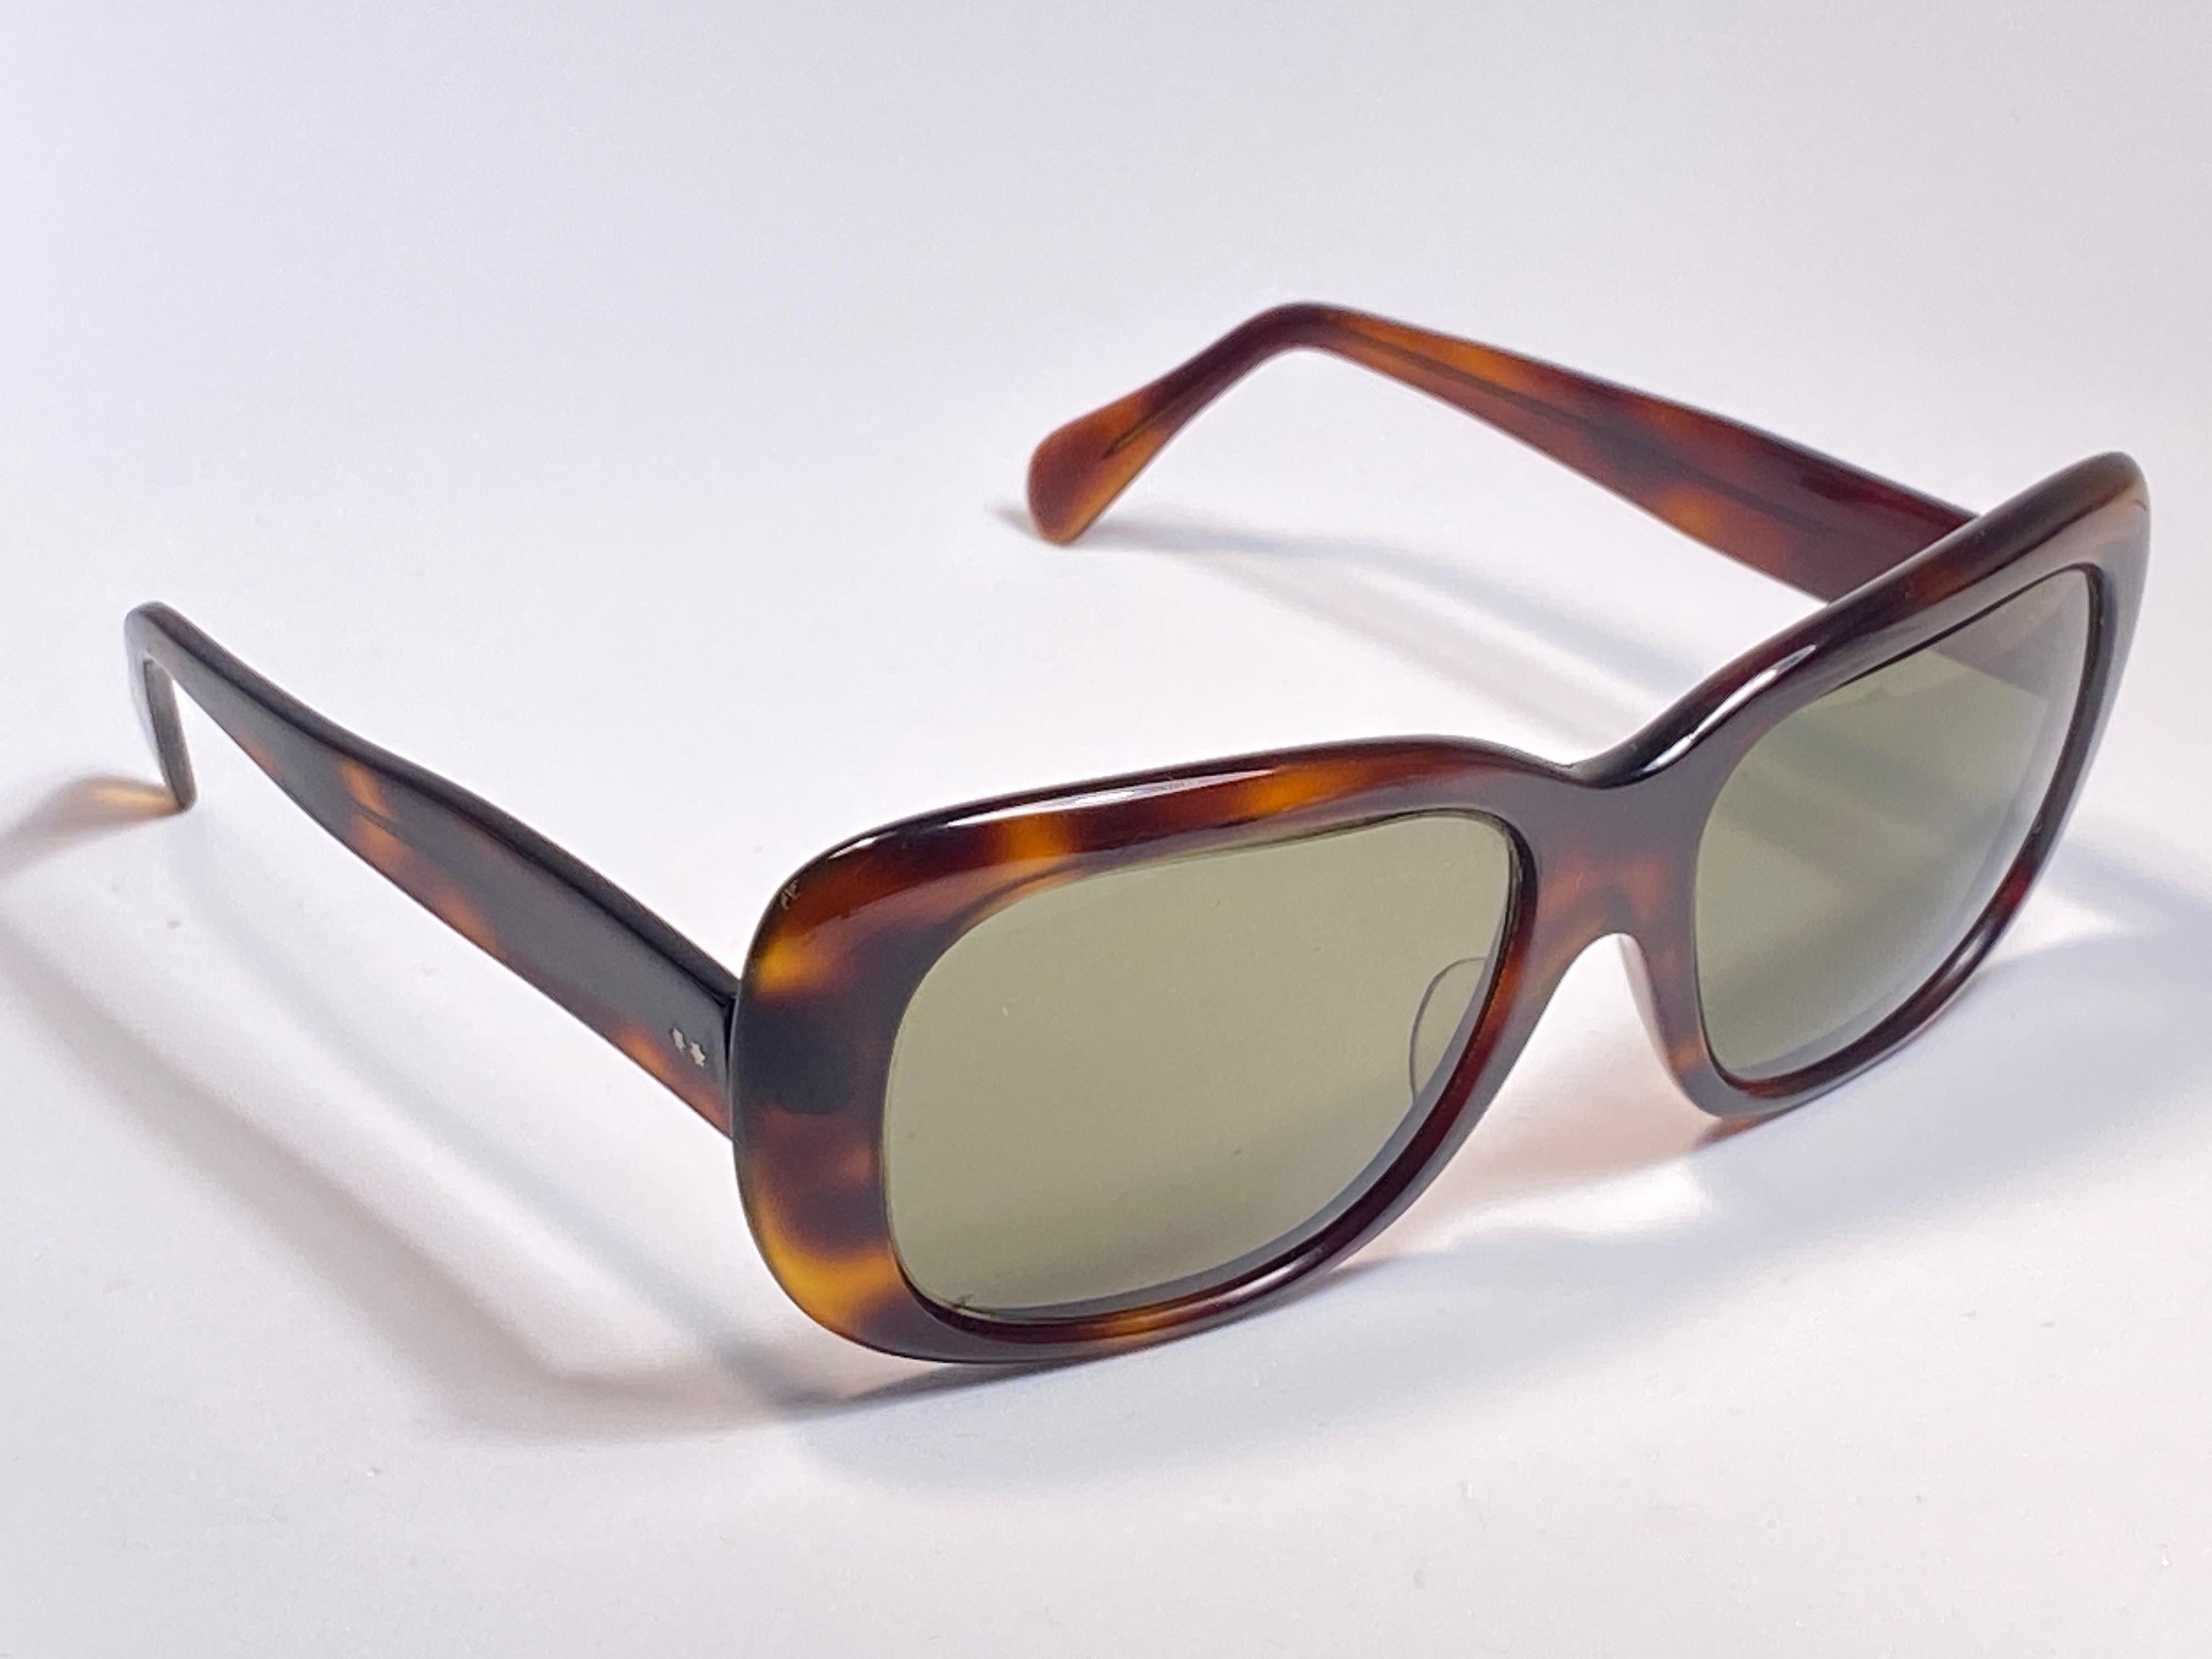 Vintage Oliver Goldsmith Dark Tortoise Oversized 1970 Made in England Sunglasses In Excellent Condition For Sale In Baleares, Baleares